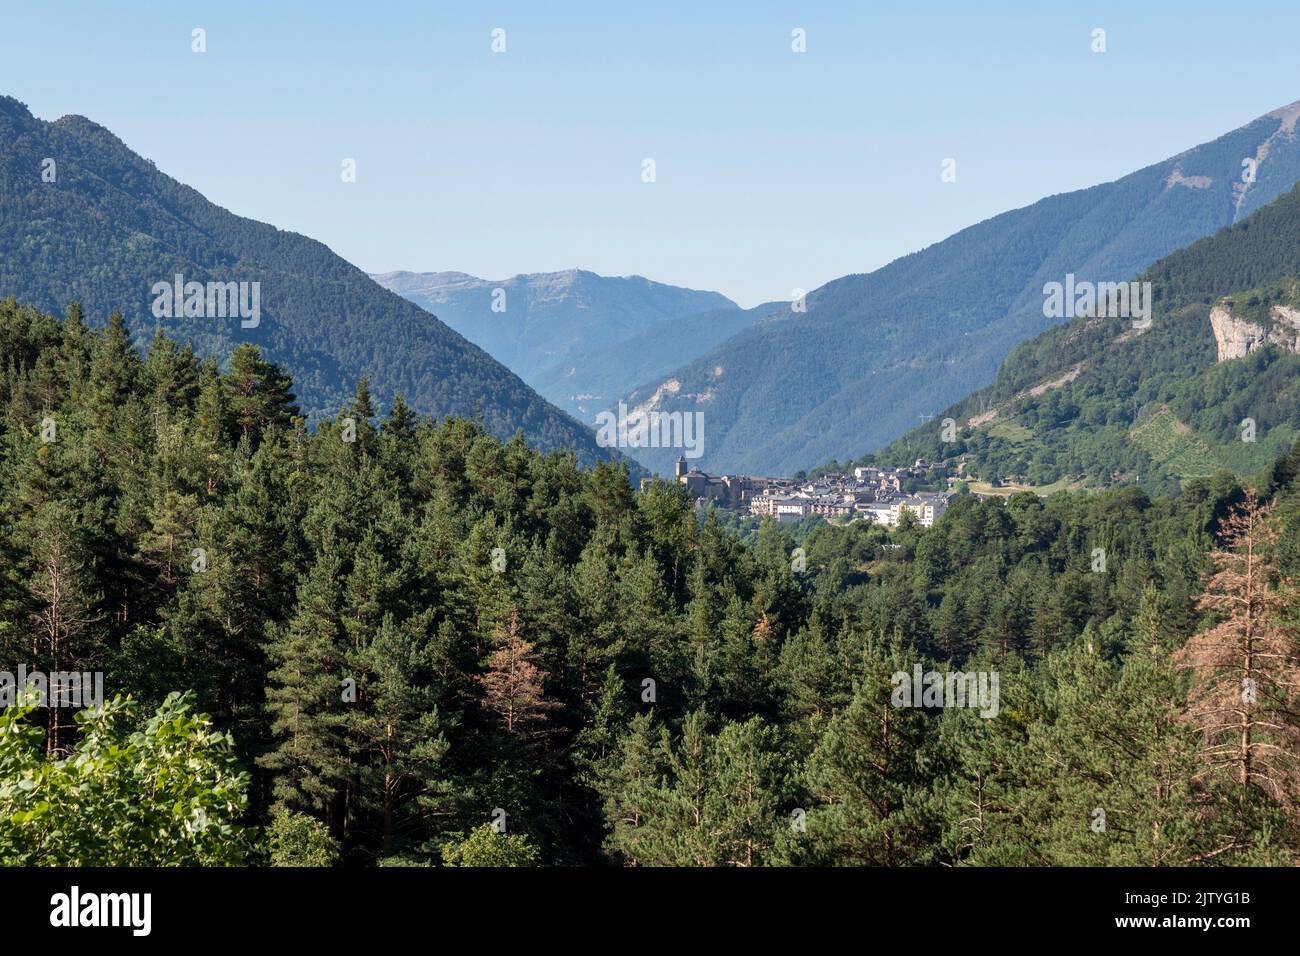 Spanish town of Torla in the Aragonese Pyrenees surrounded by forests Stock Photo